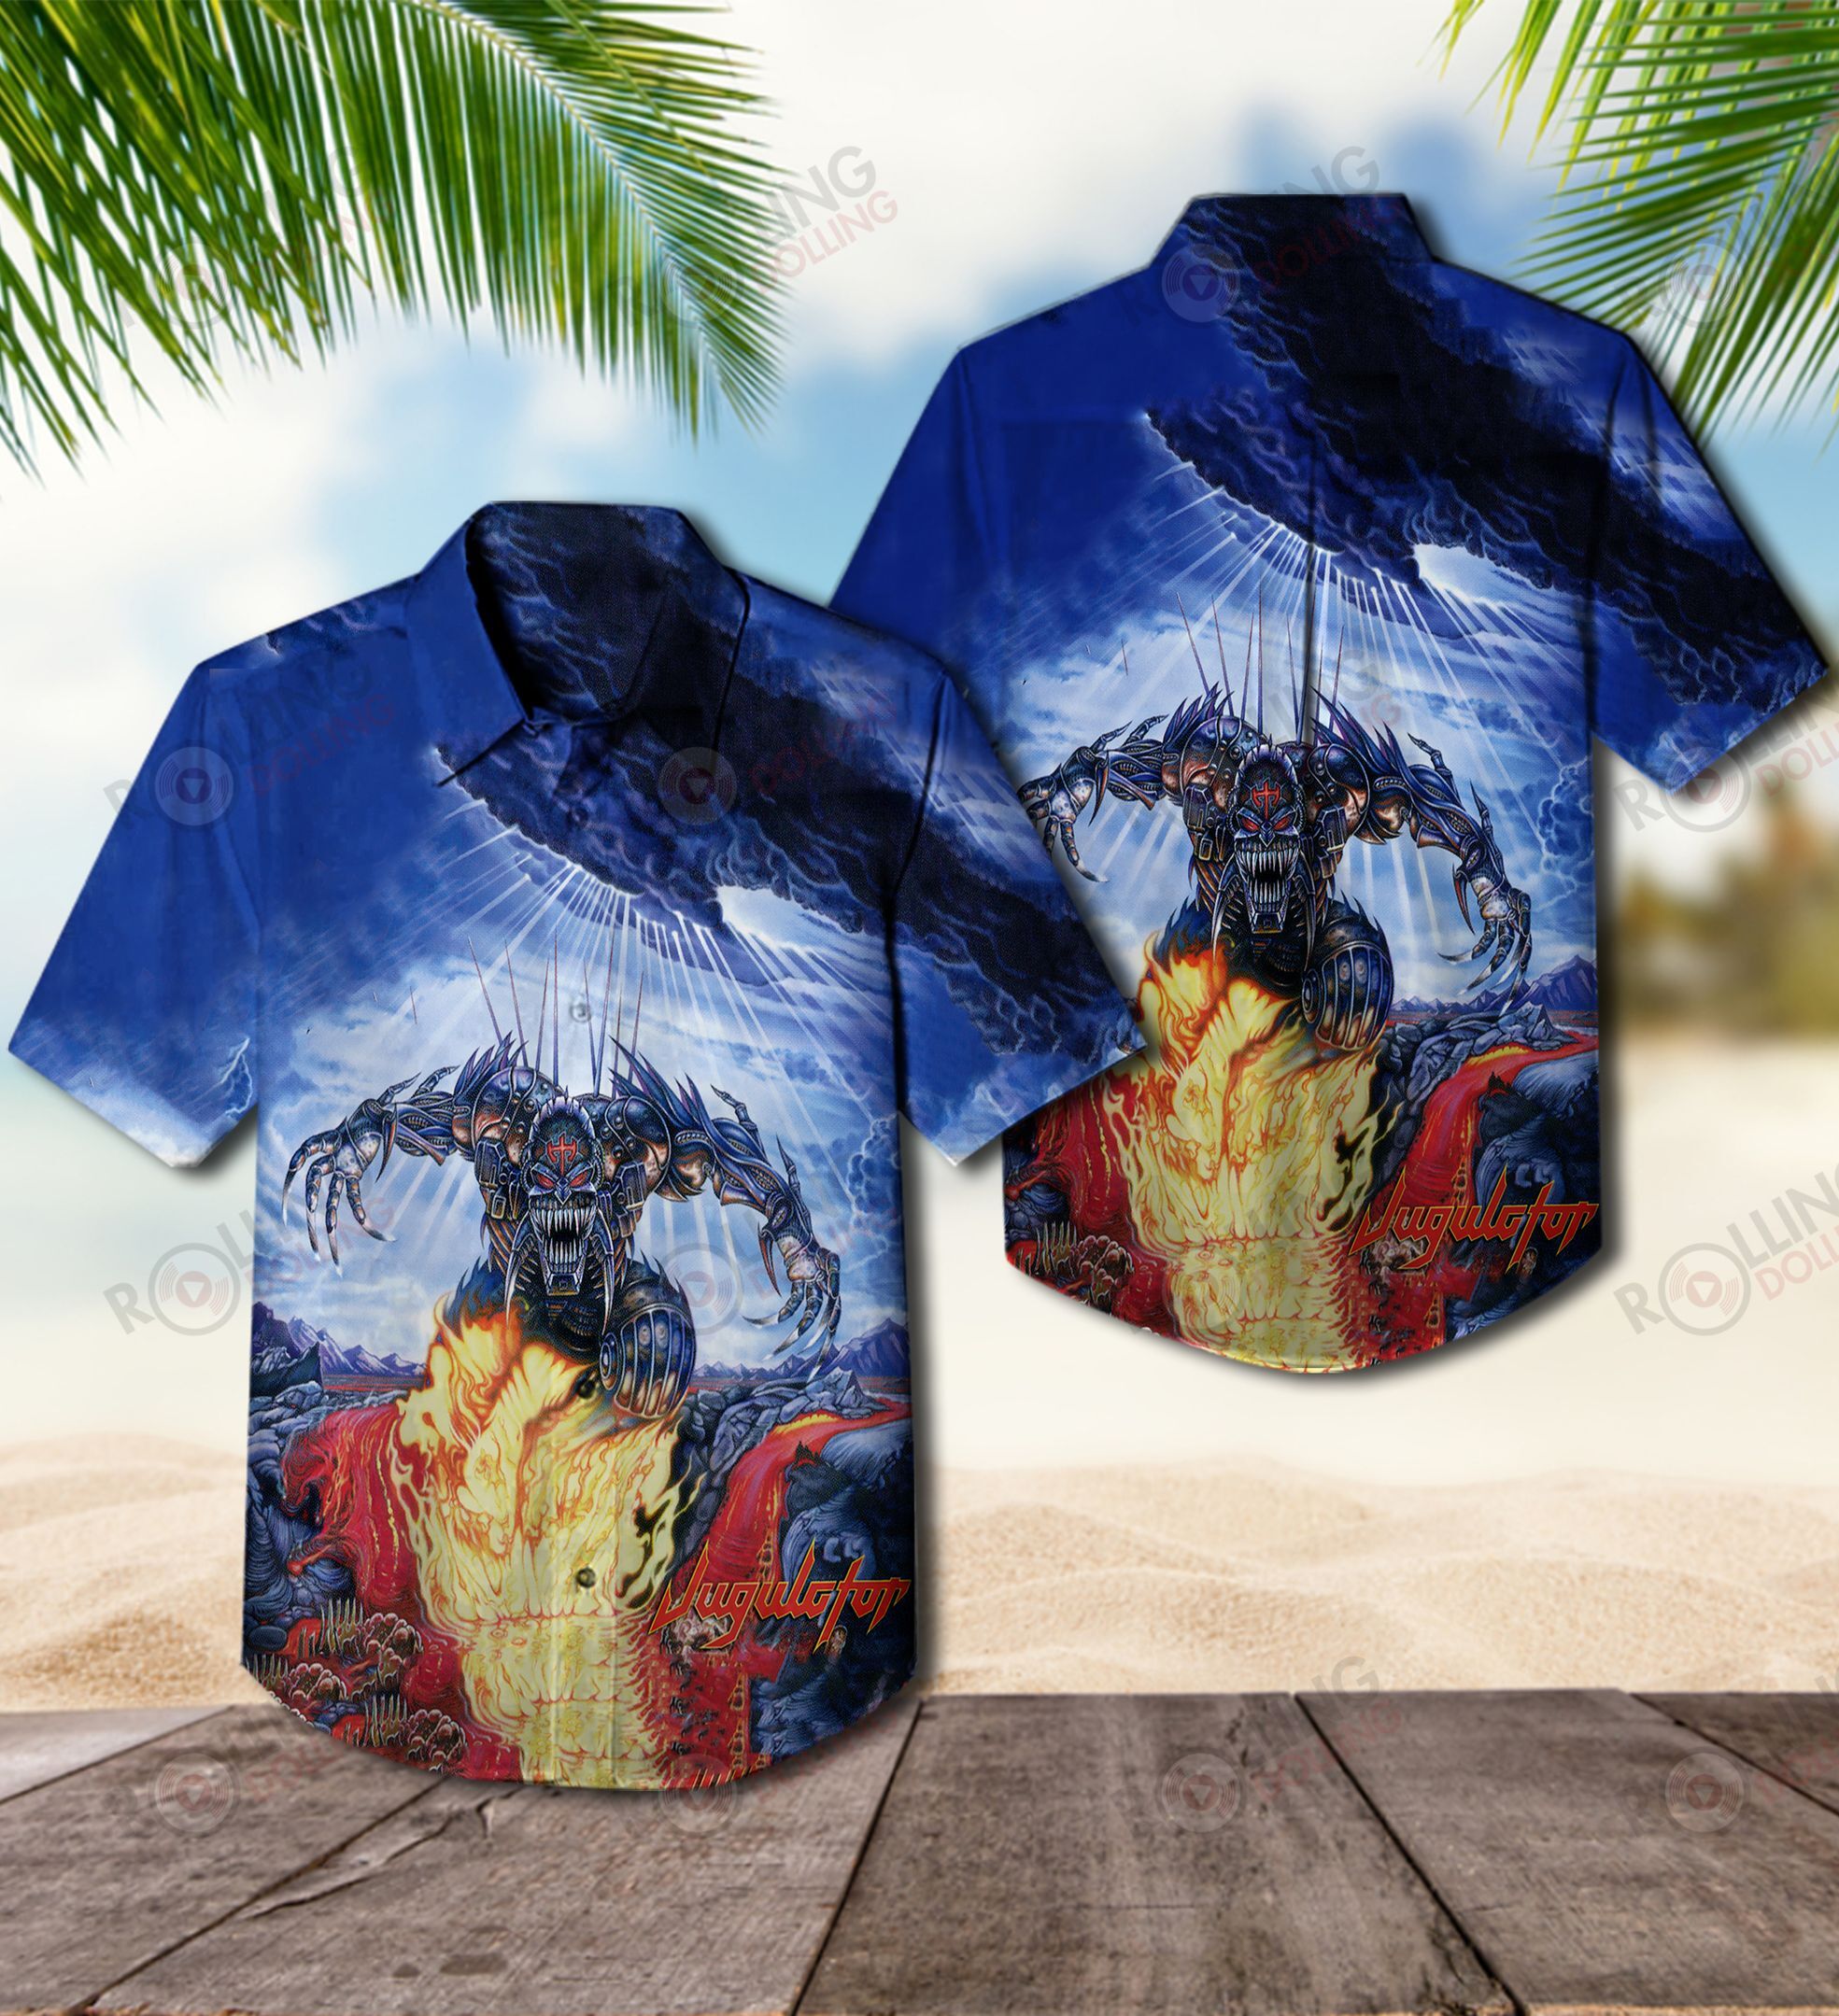 This would make a great gift for any fan who loves Hawaiian Shirt as well as Rock band 116